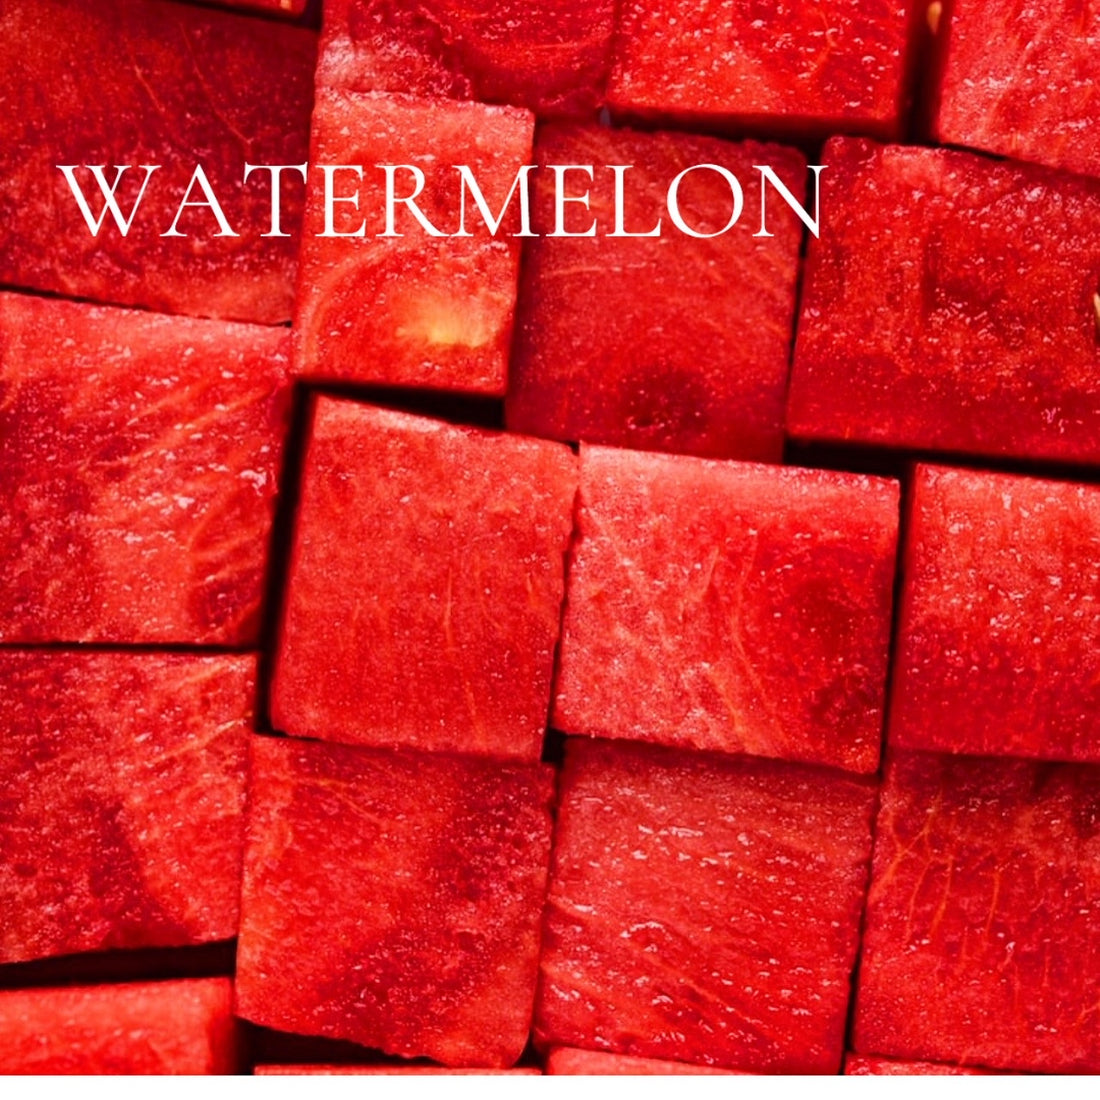 WATERMELON -  Room and Body Spray, Buy 2 Get 1 FREE